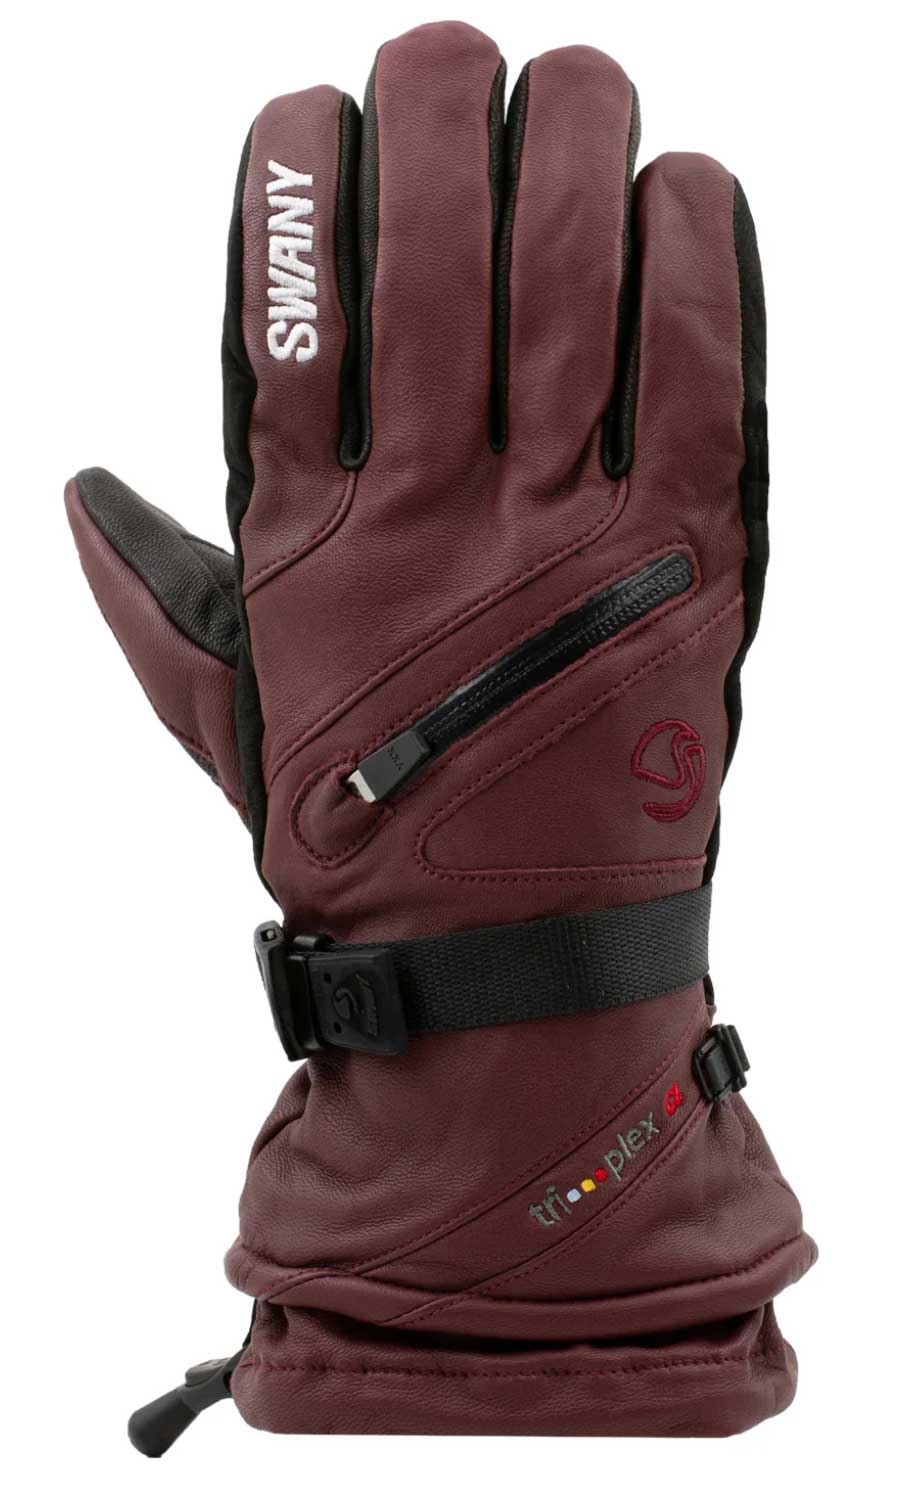 image swany-x-cell-glove-jpg